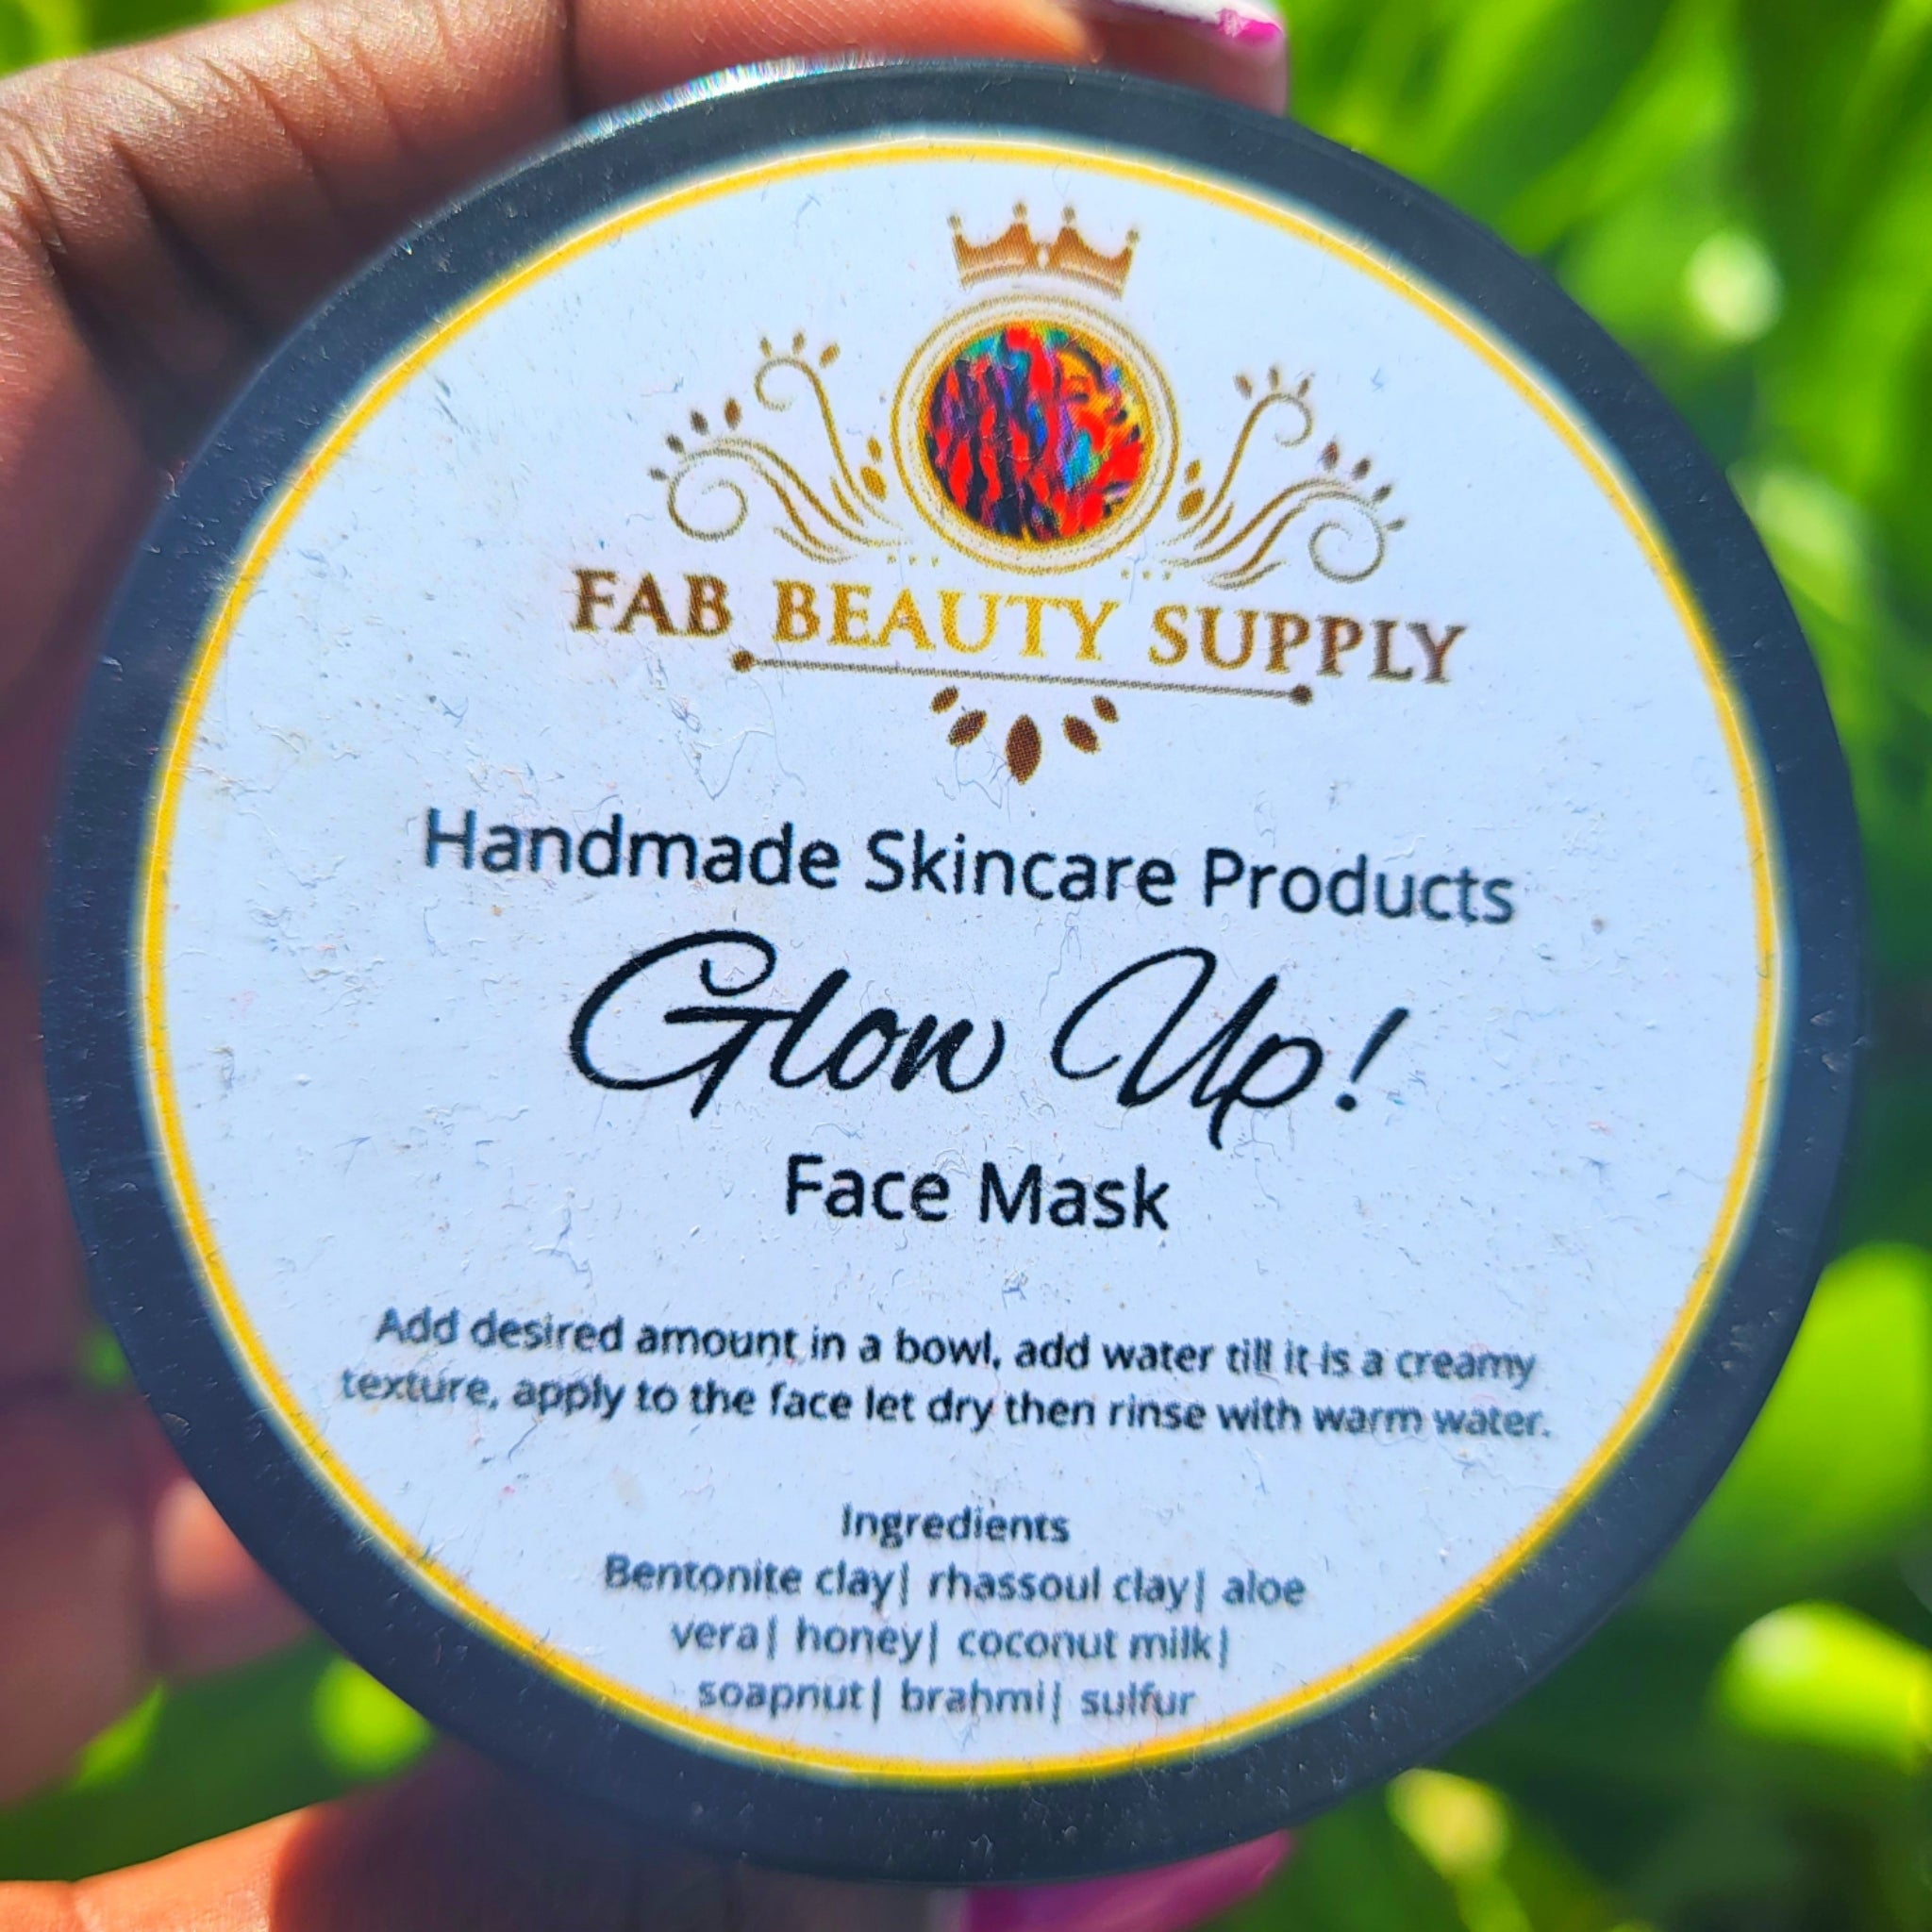 Glow Up! Face Mask